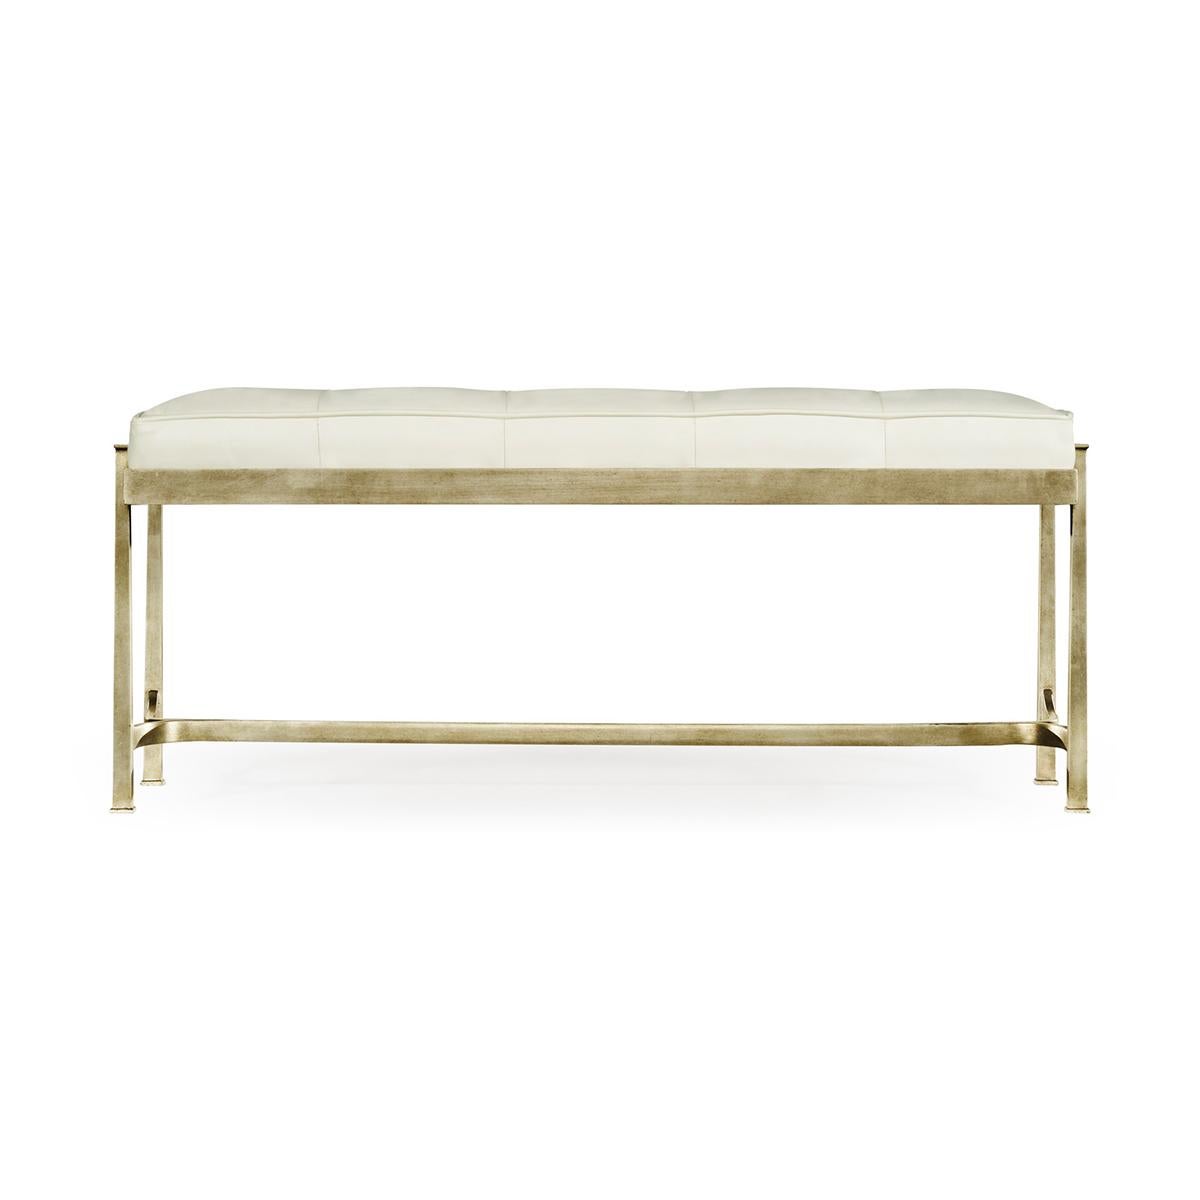 Vietnamese Art Deco Silvered Bench For Sale